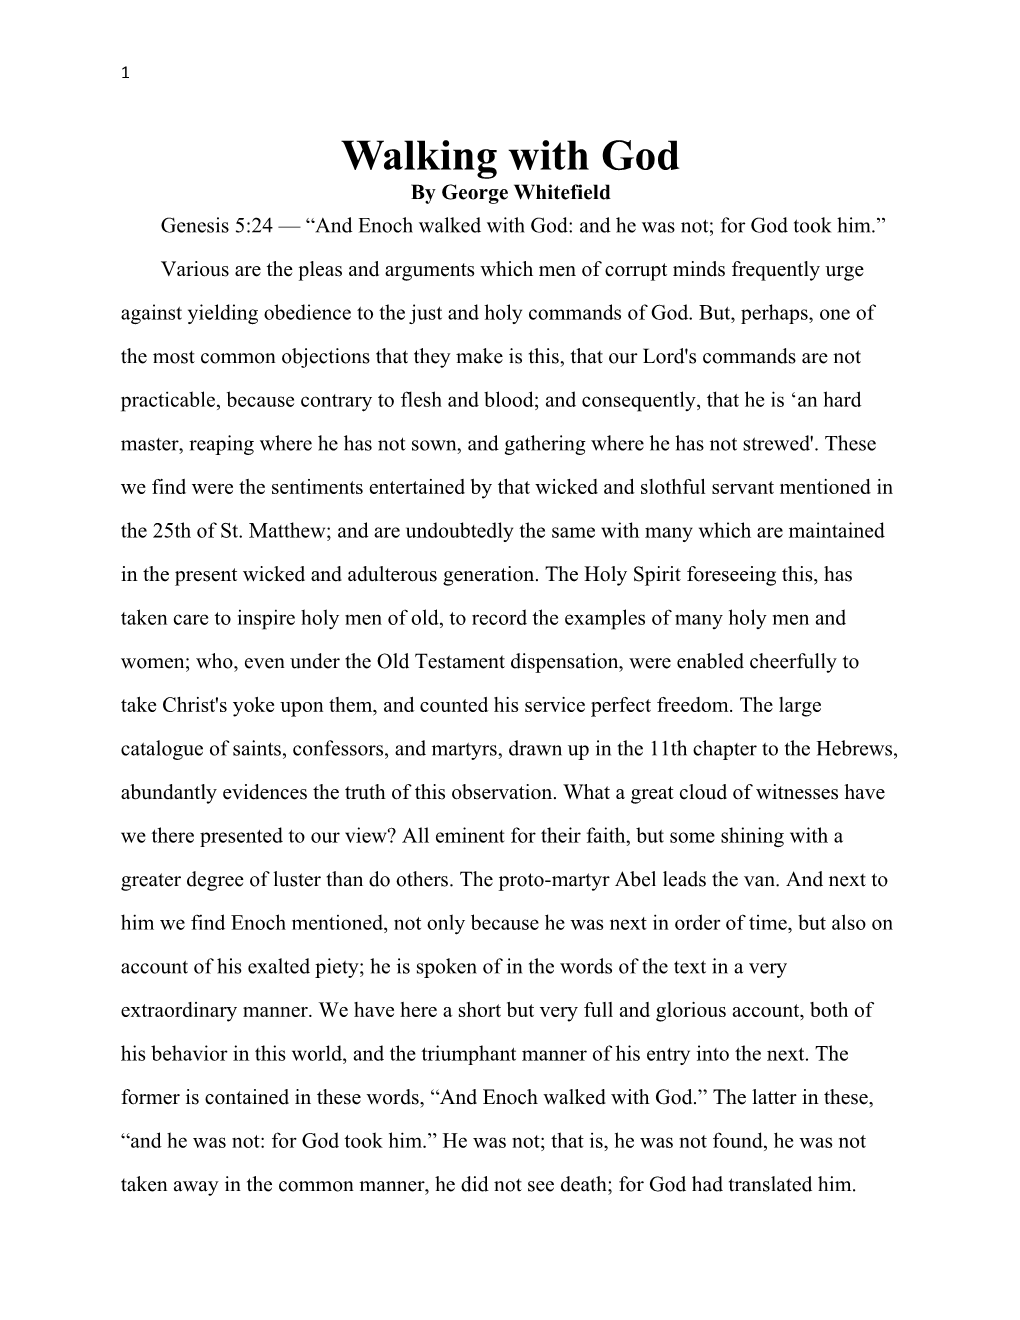 Walking with God by George Whitefield